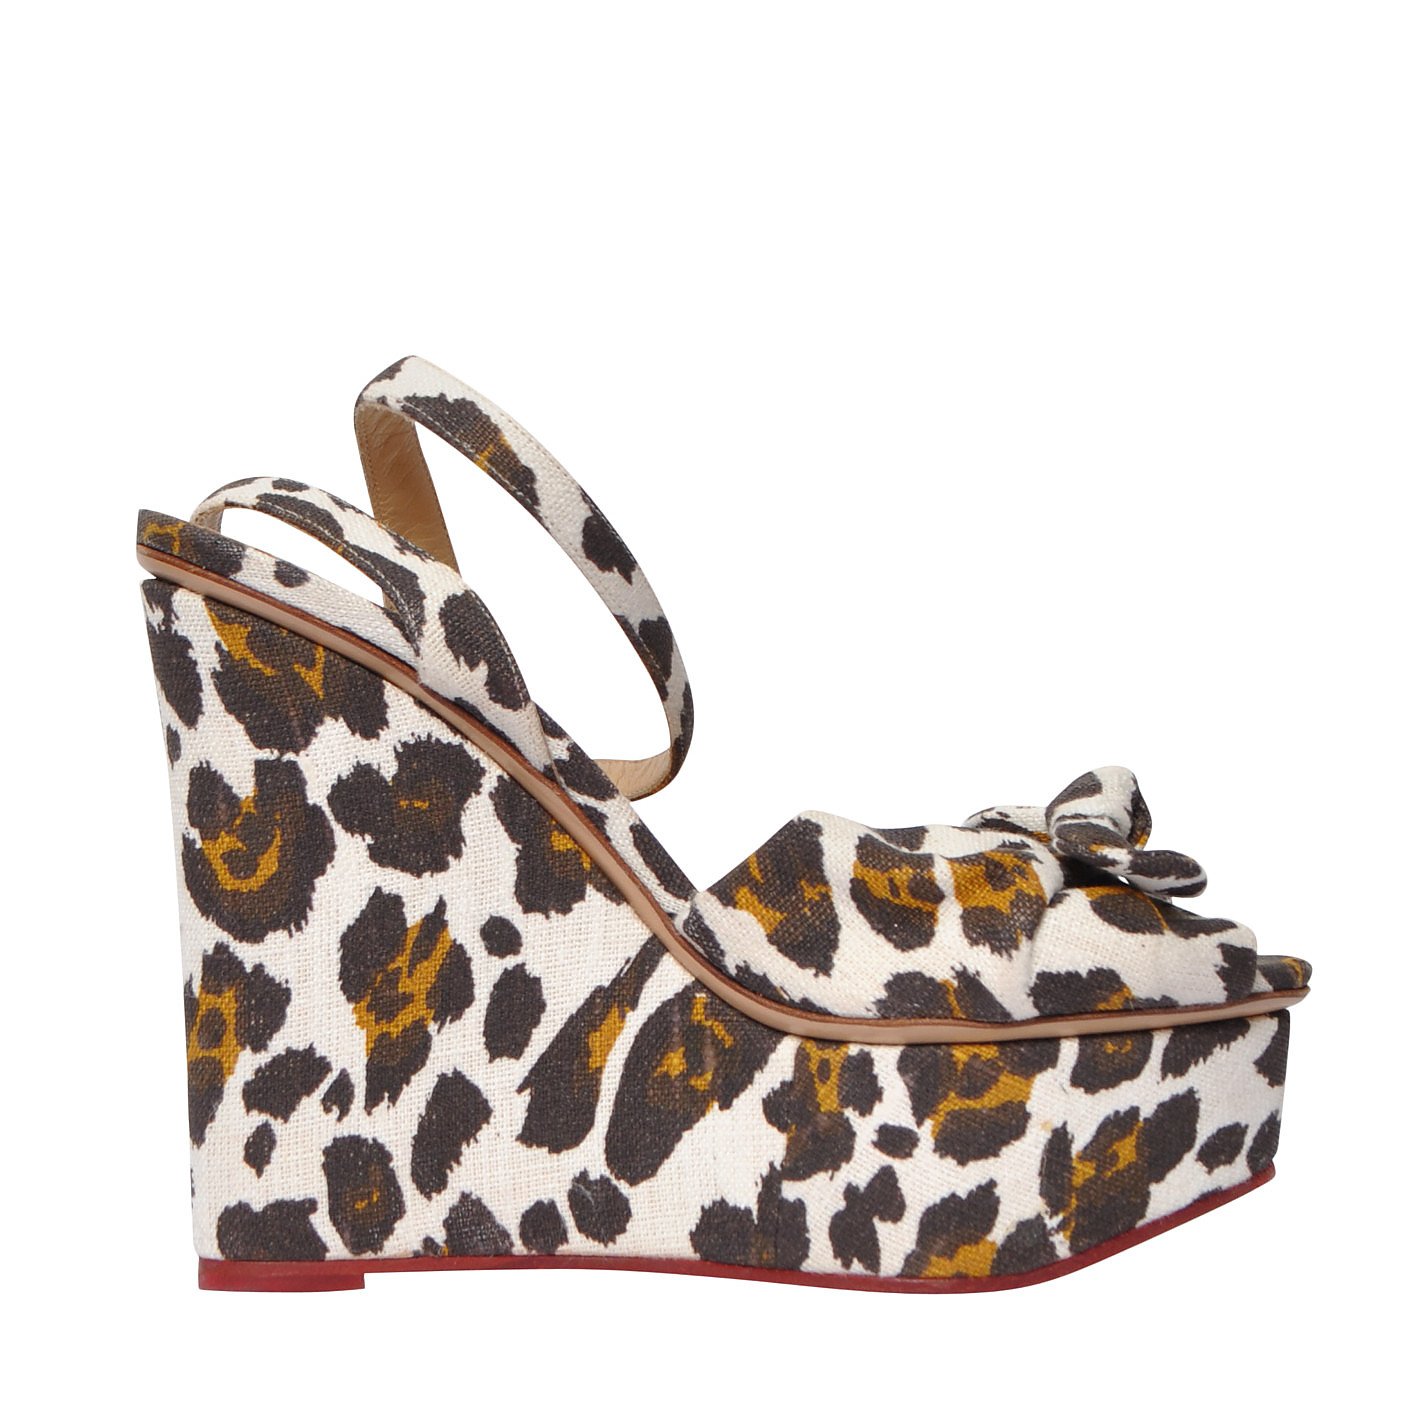 Charlotte Olympia Leopard-Print Wedges